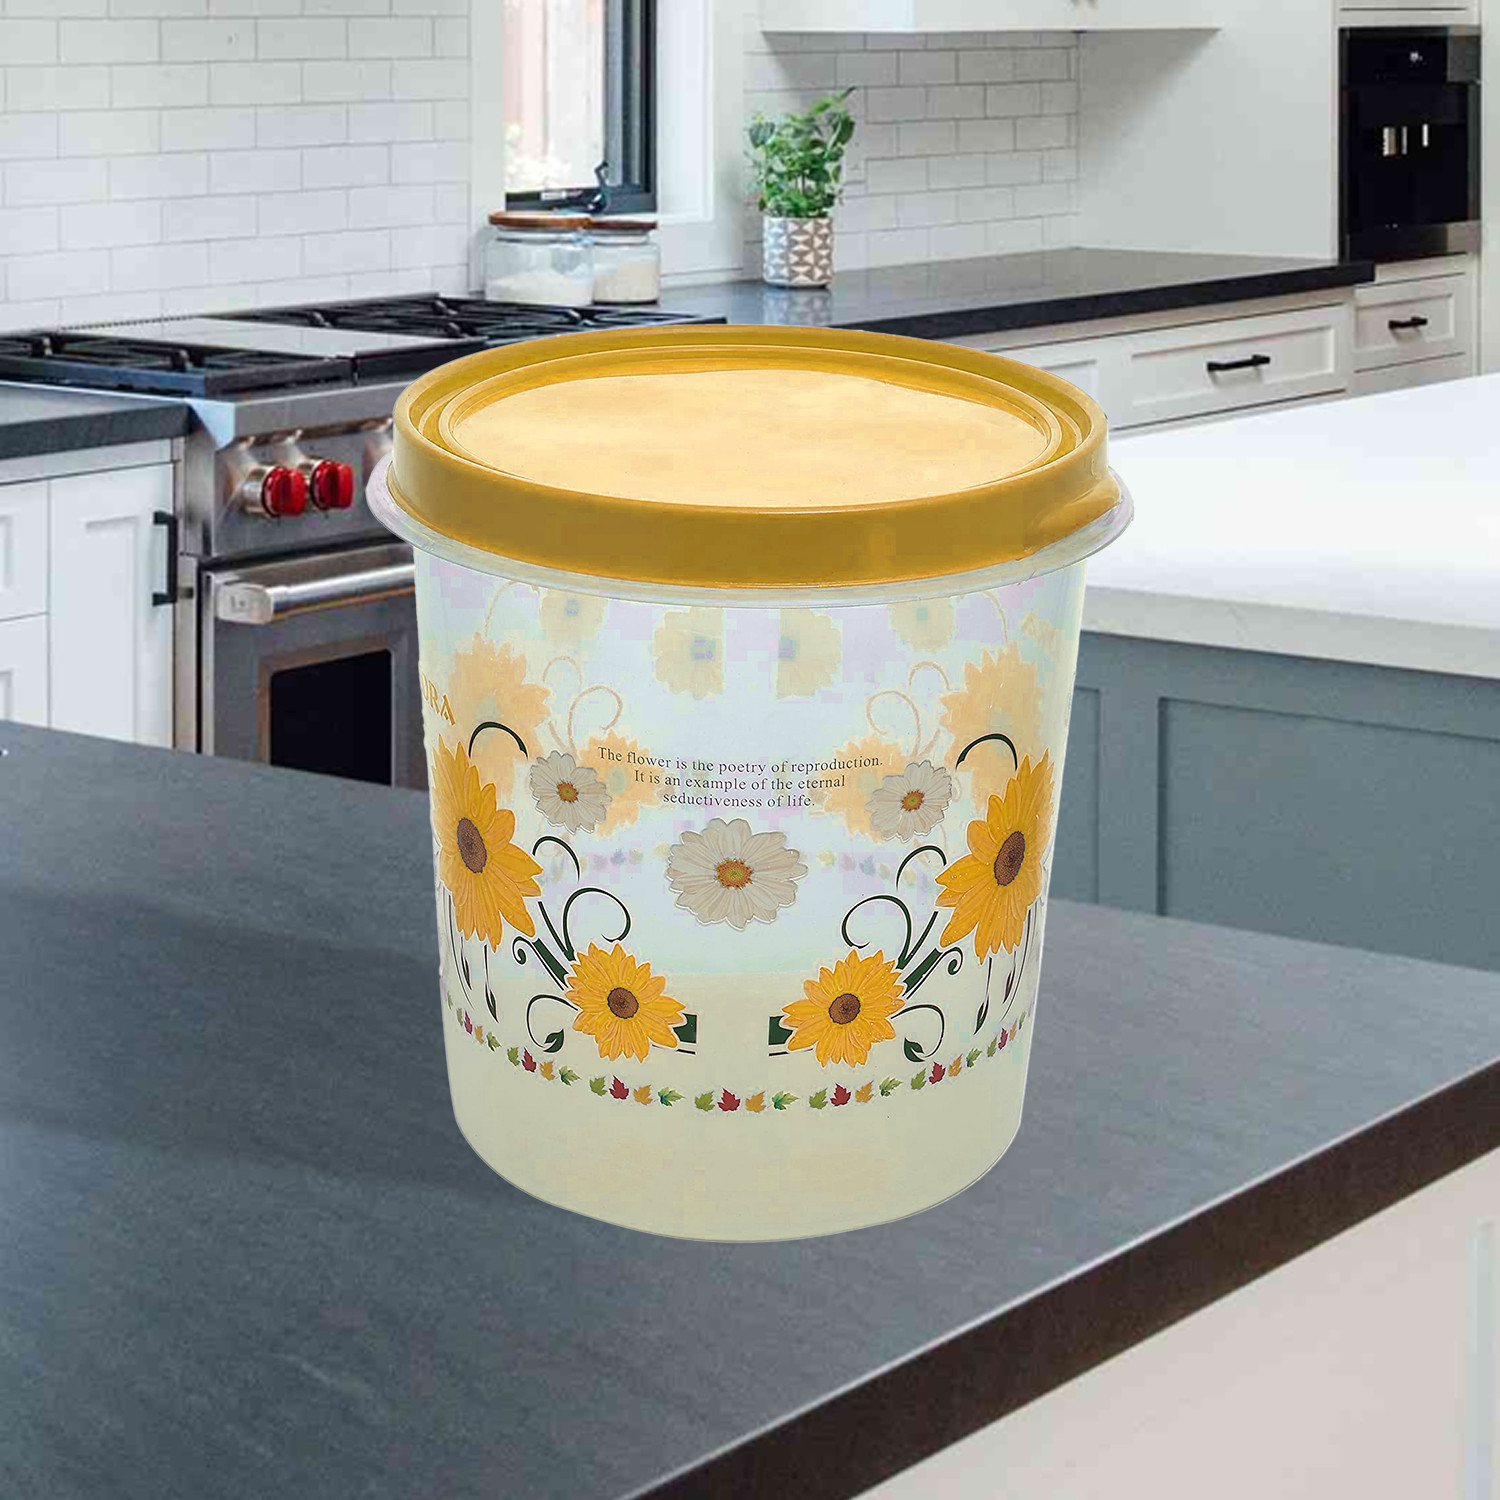 Kuber Industries Storage Container|Durable Plastic Floral Design BPA Free Food Kitchen Organizer With Lid|Food Utility Jar, 5 Ltr (Yellow)